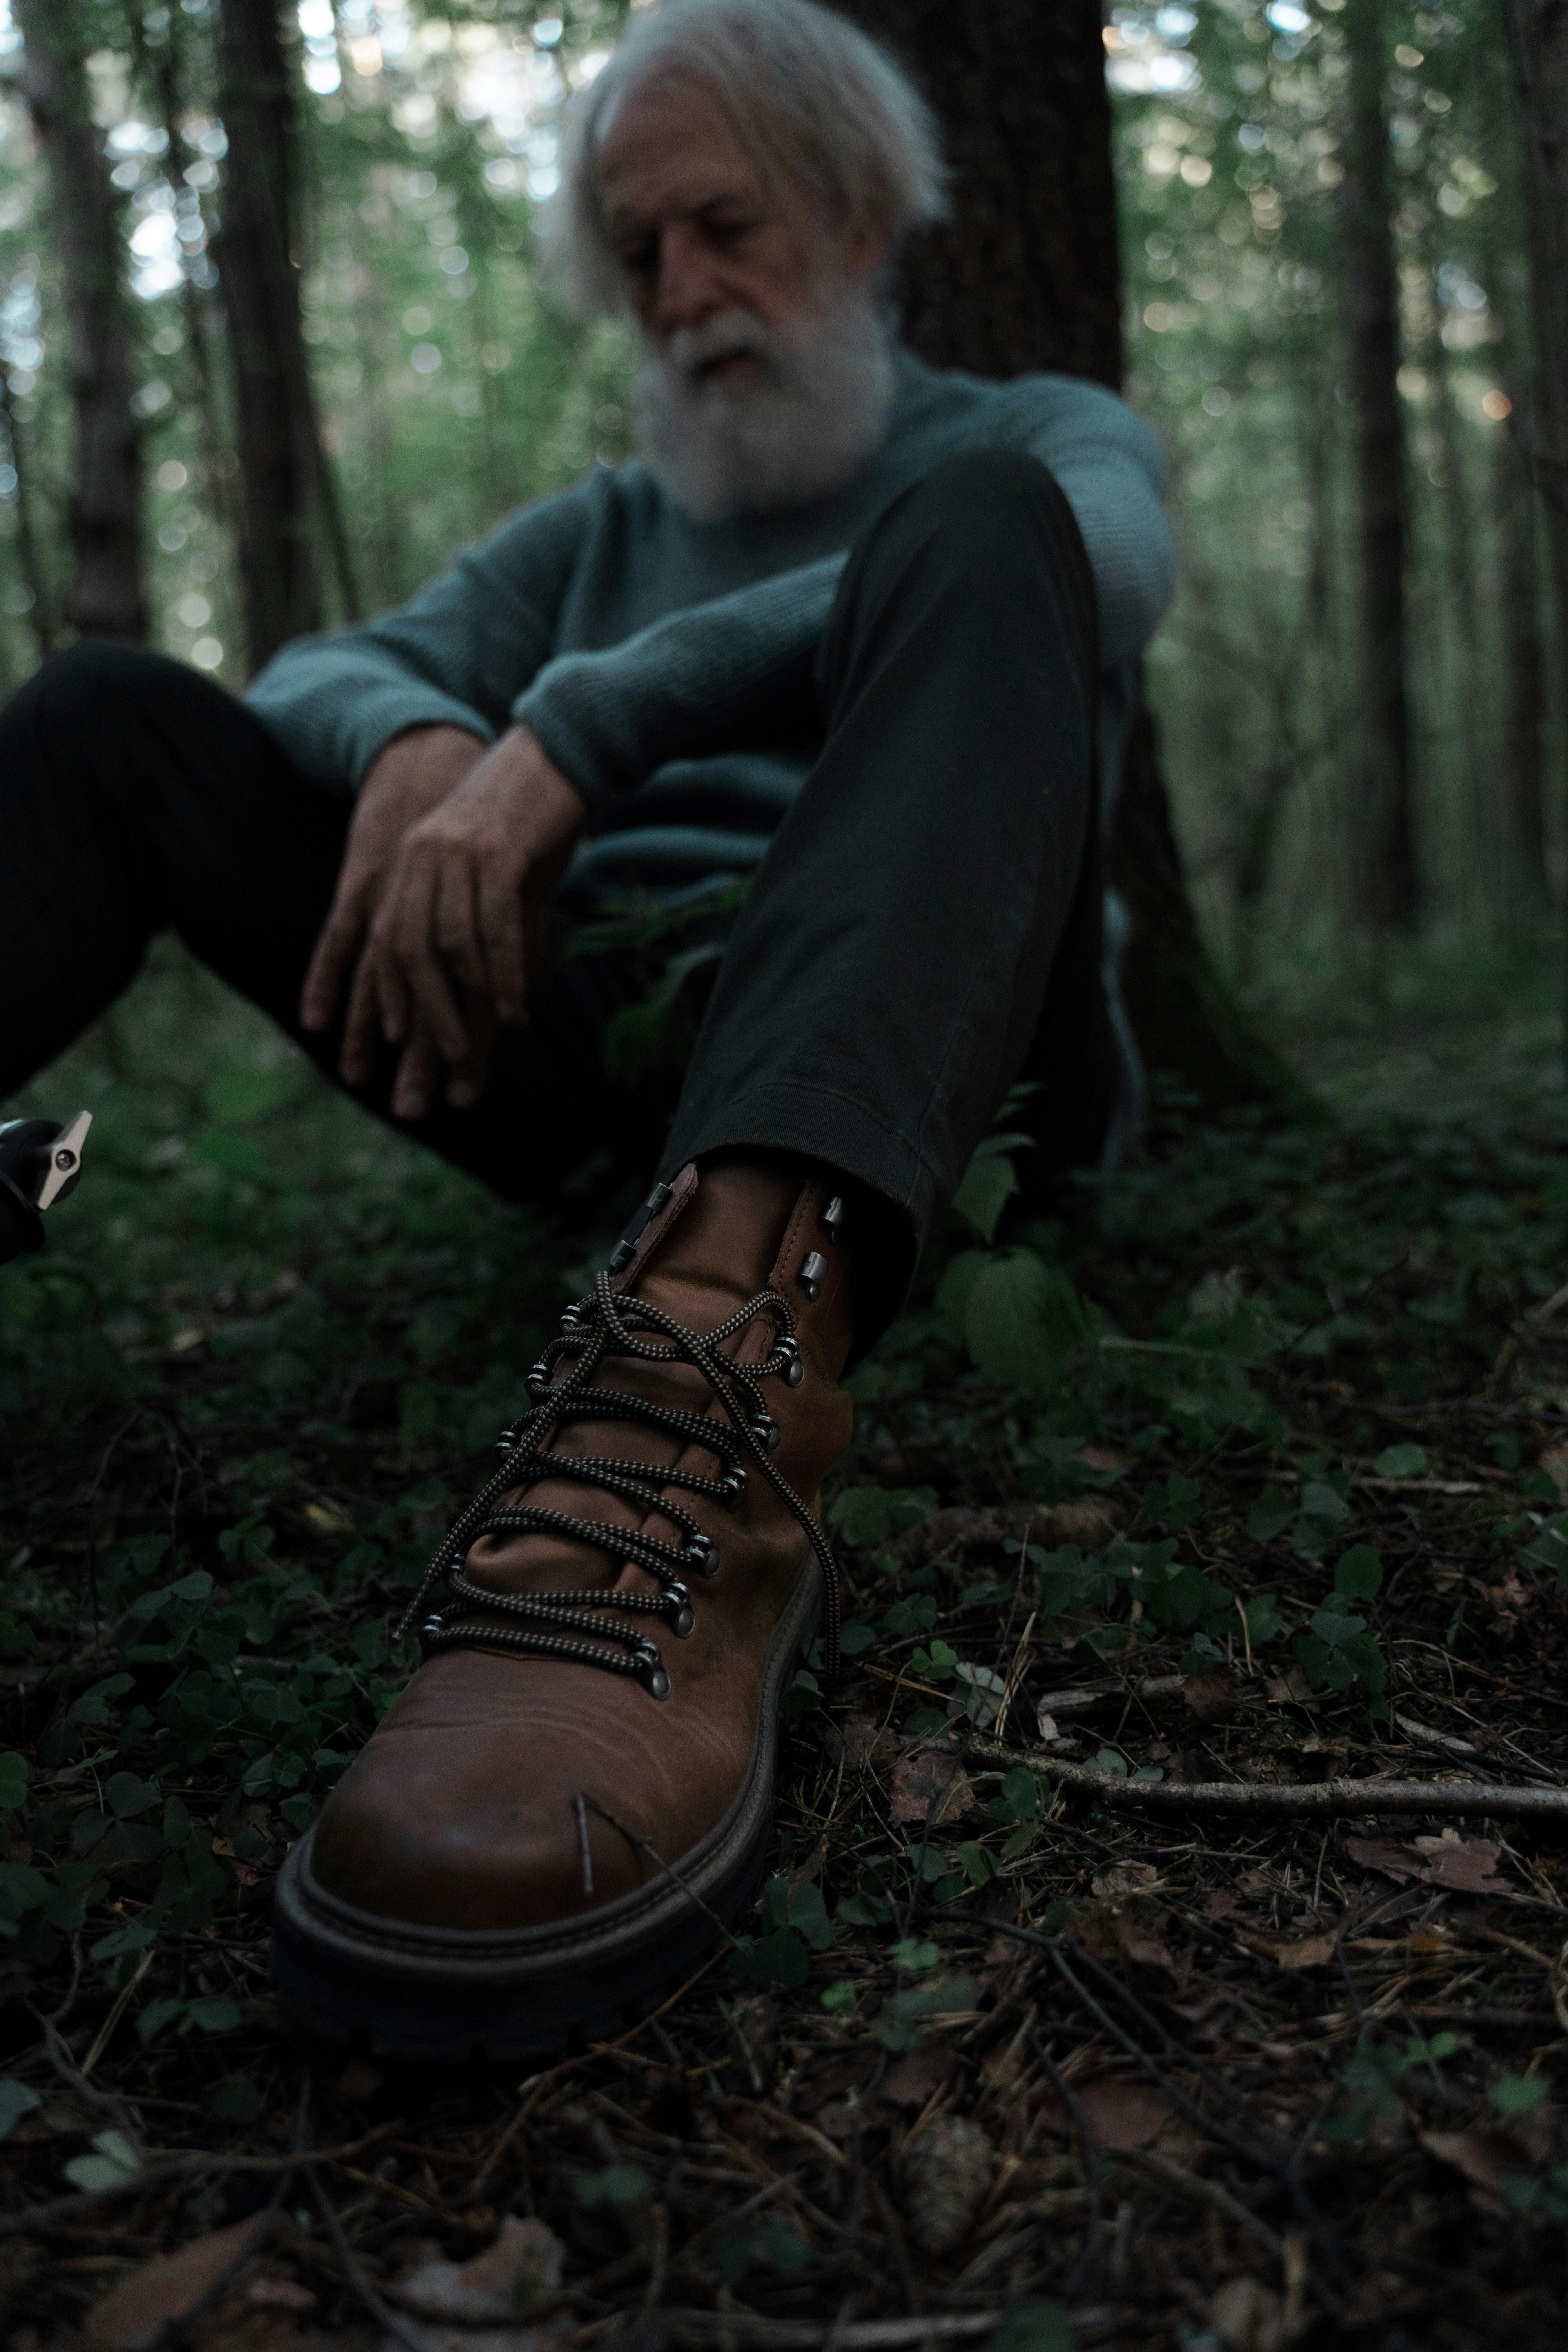 Leather Hiking Boot with Knitted Socks Stock Image - Image of person,  forest: 280229309